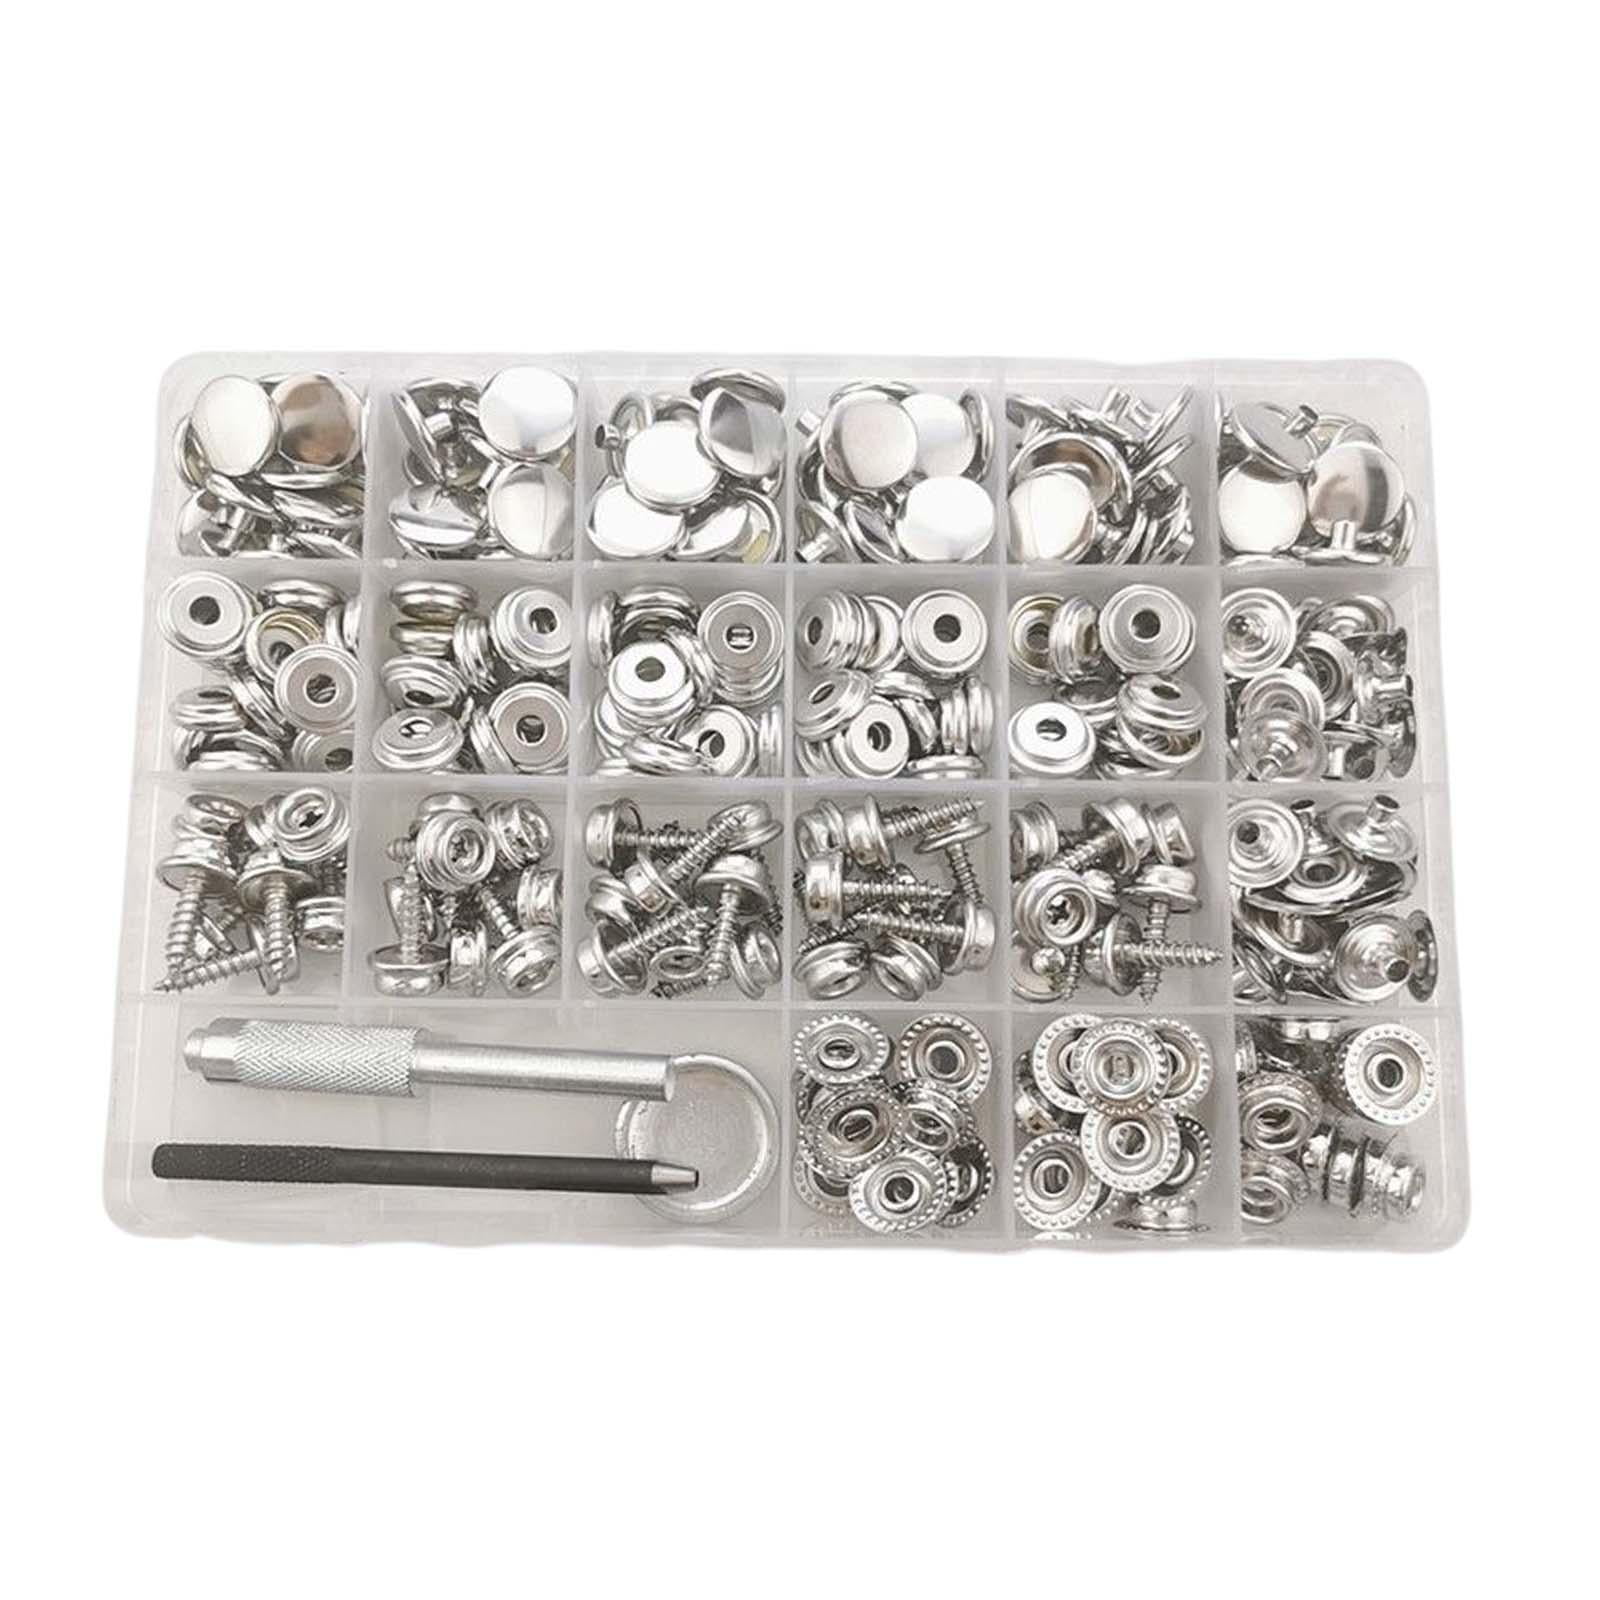 100 Sets 9.5mm Snap Buttons Heavy Duty Rust Resistance Ring Snaps Color Metal Snap Fasteners Kit DIY Hollow Snap Fastener Set for Baby Children's